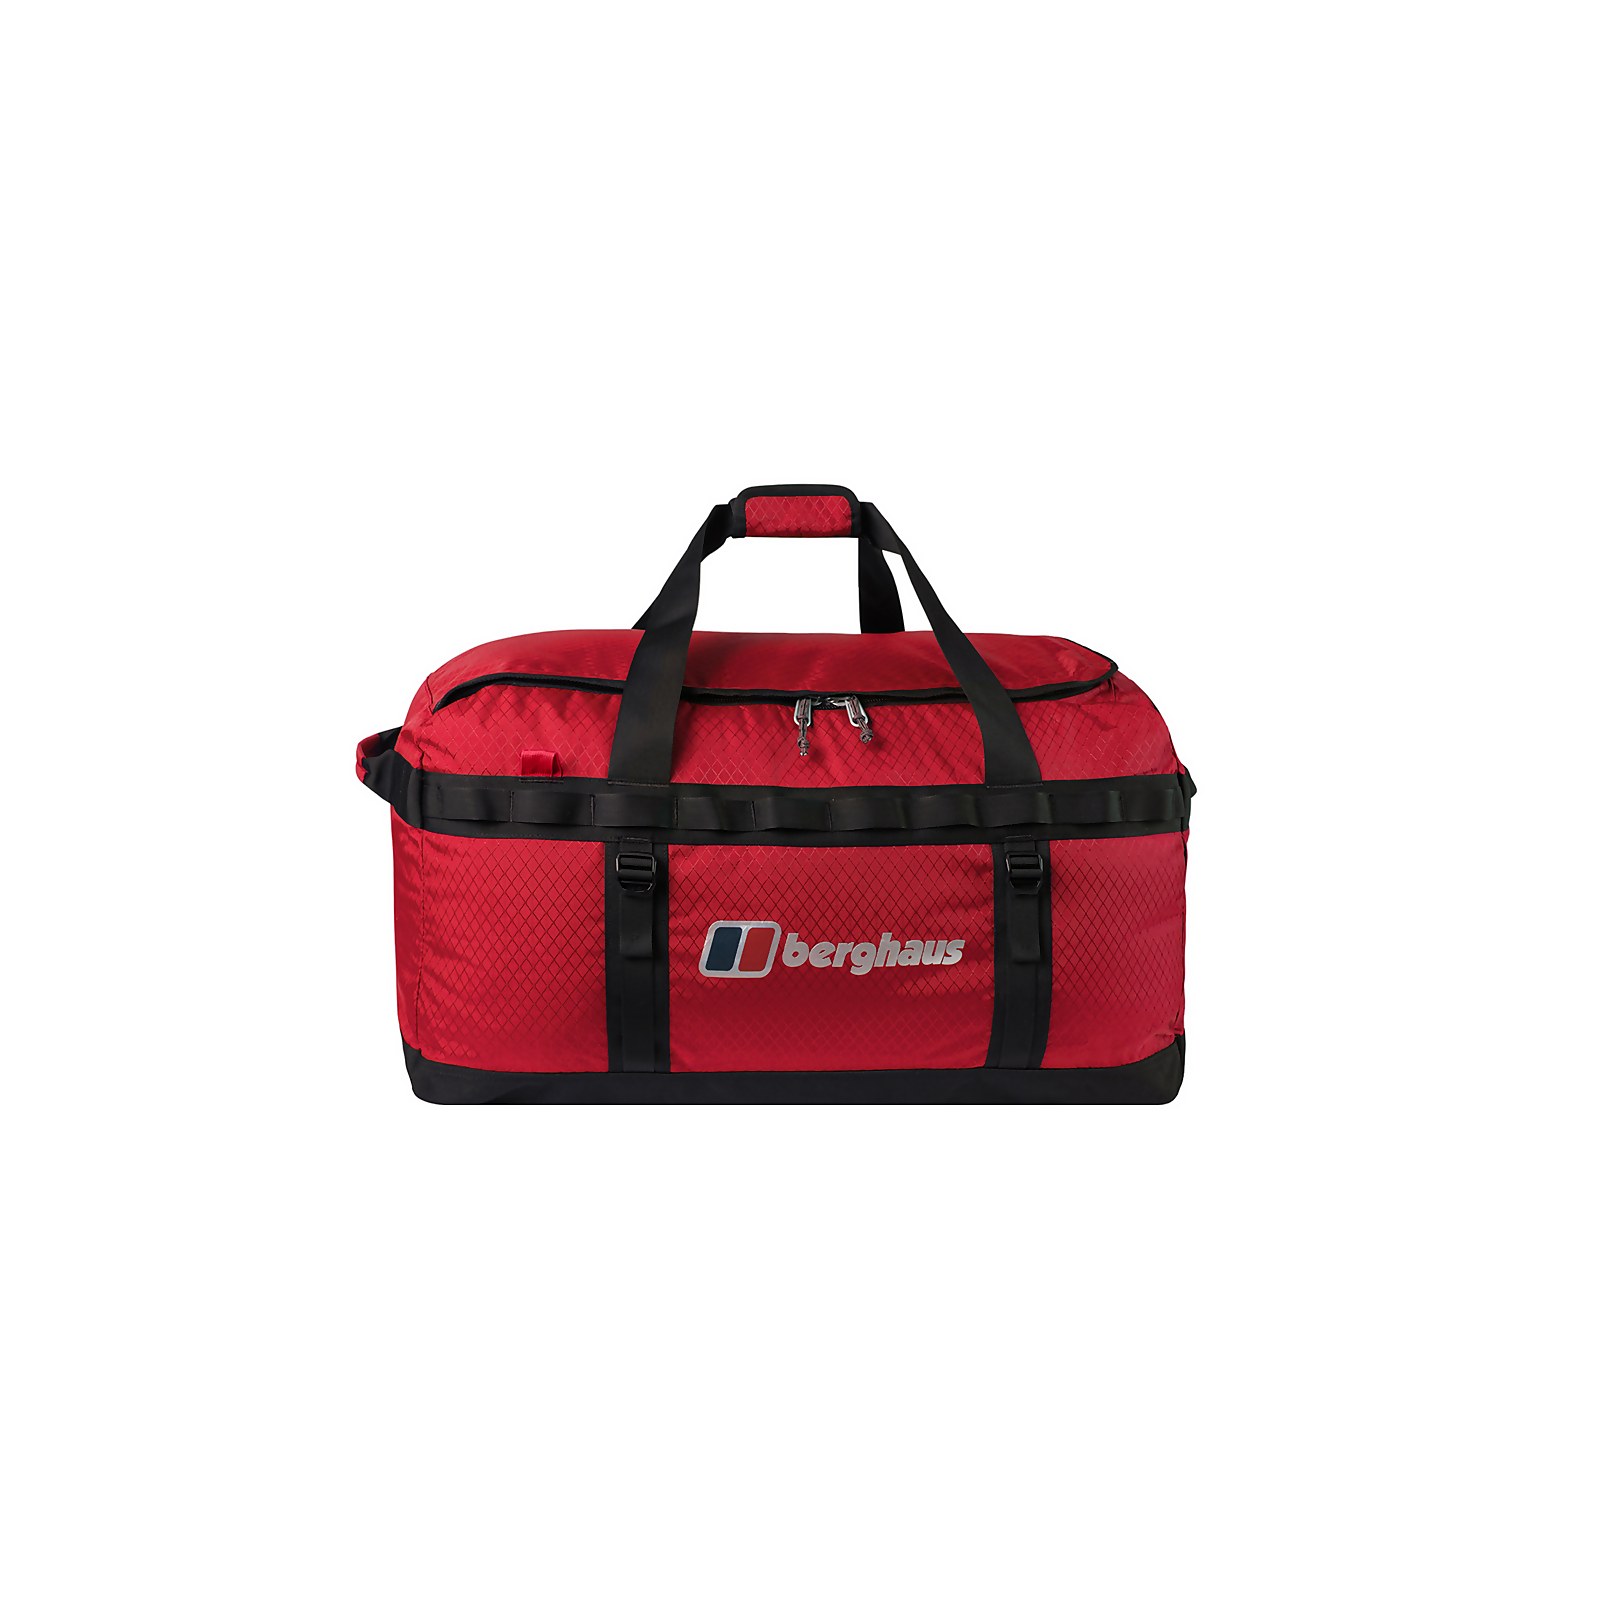 Berghaus Expedition Mule 40 - Red / Black - One Size